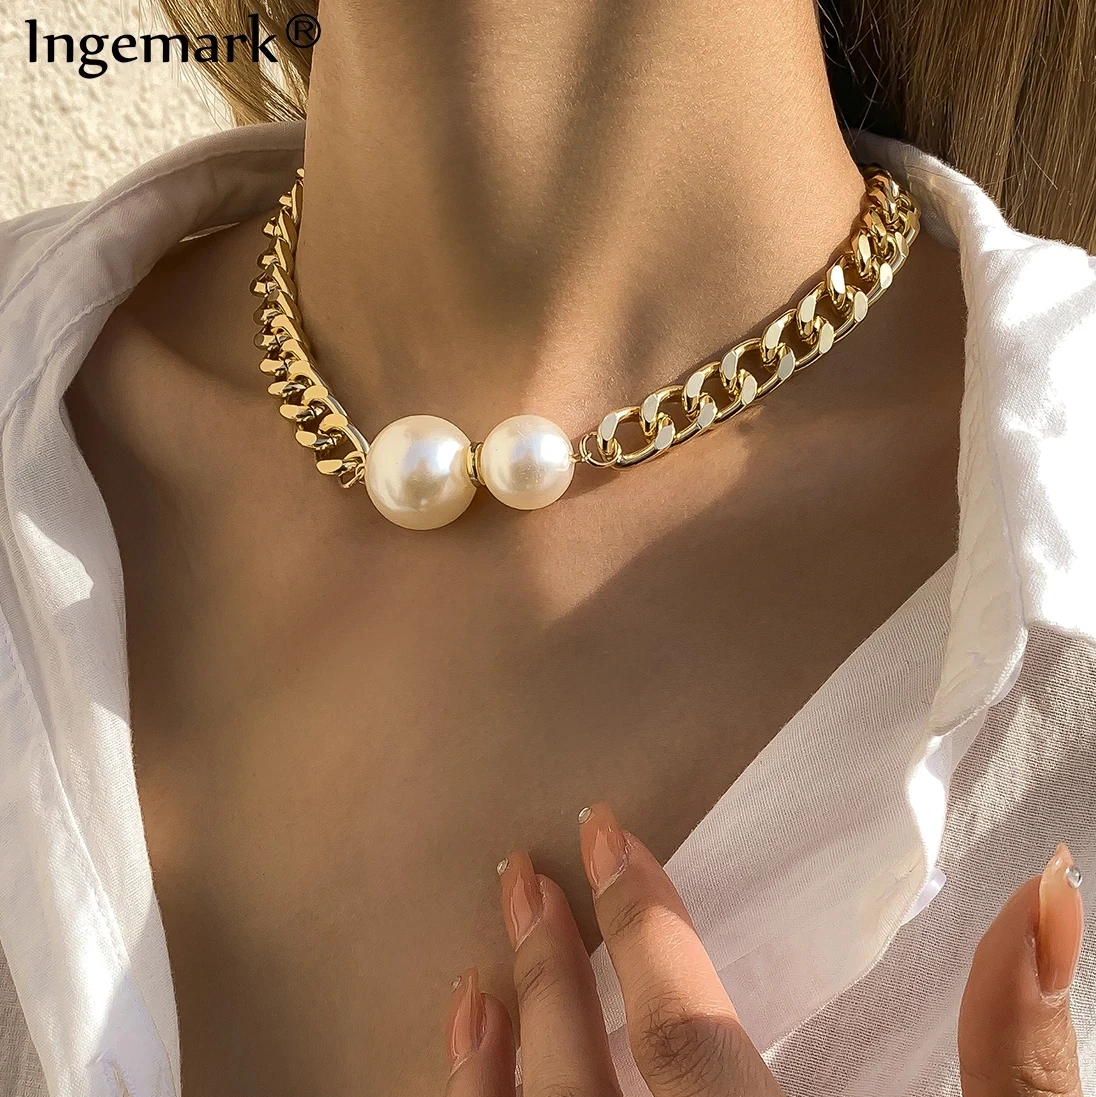 Vintage Smooth Cuban Chains Necklaces Women Gothic Round Pearl Pendant Necklace Girl Chokers Fashion Accessories Jewellery New